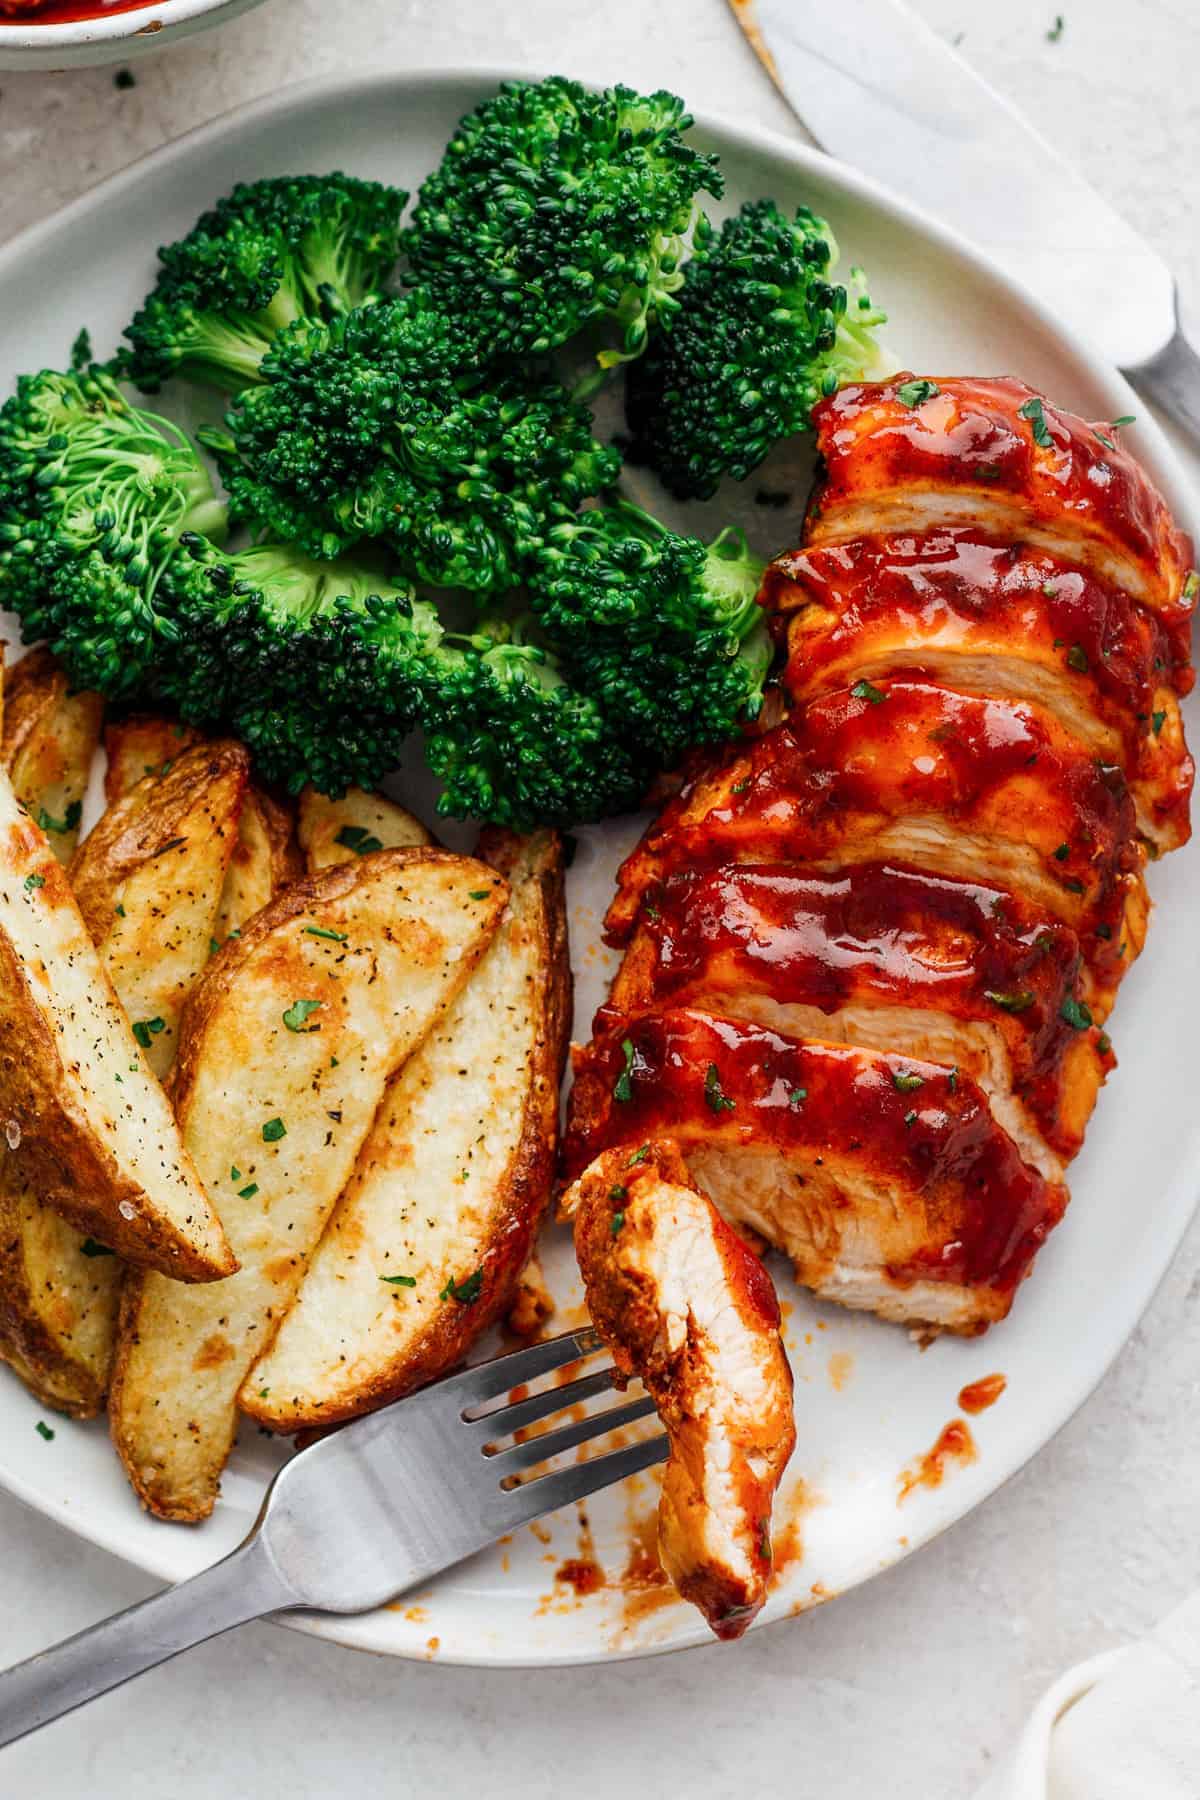 sliced bbq chicken breast on plate with broccoli and potato wedges